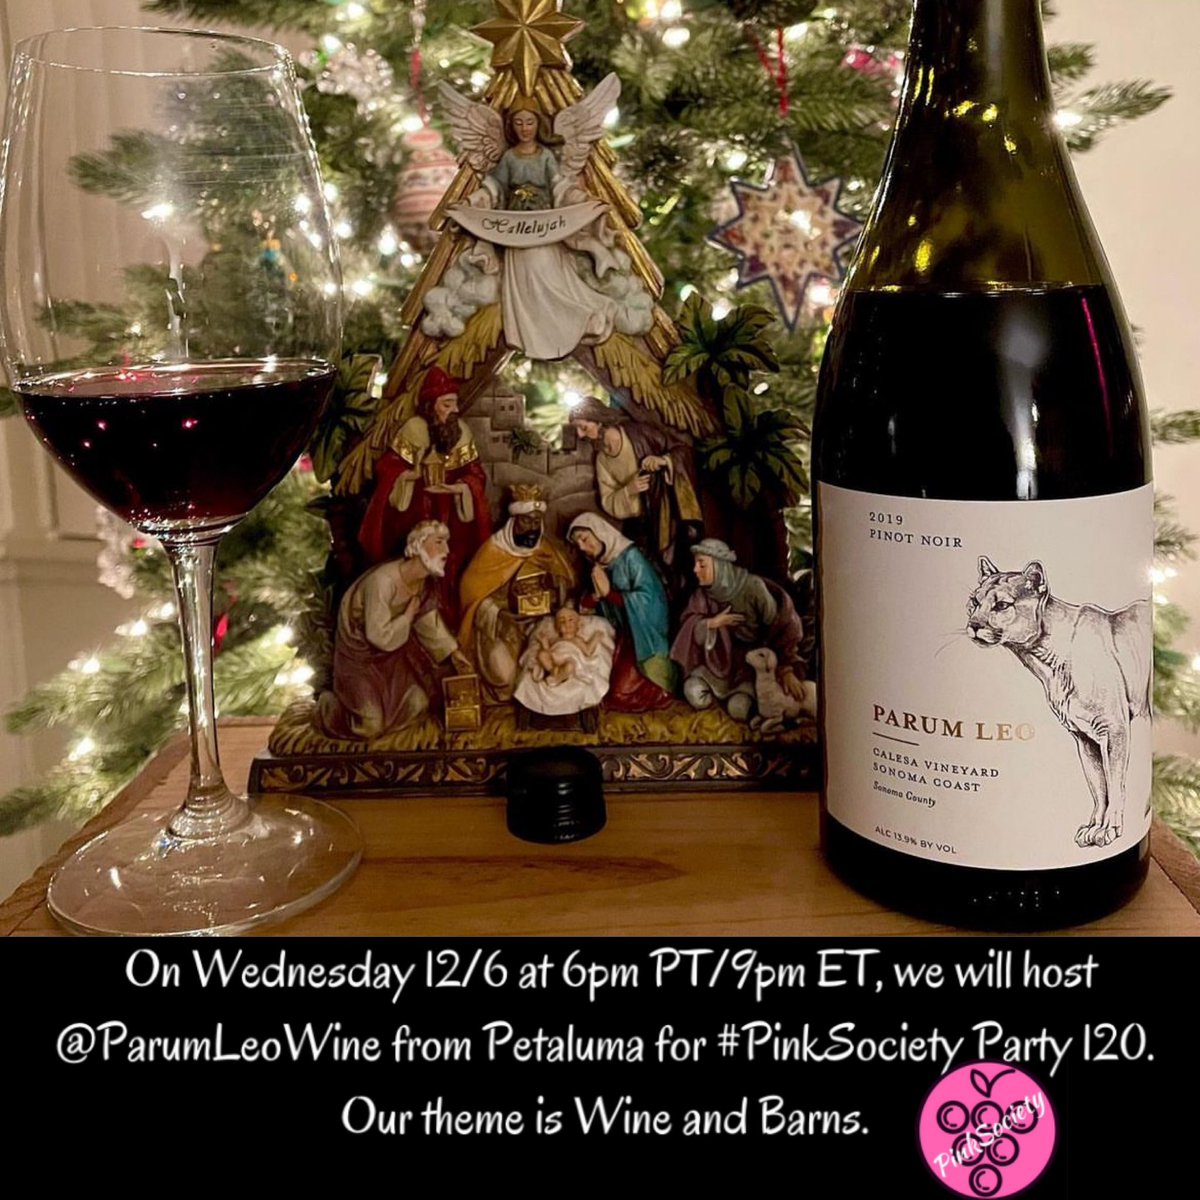 On Wednesday 12/6 at 6pm PT/9pm ET, we will host @ParumLeoWine from Petaluma for #PinkSociety Party 120. Our theme is Wine and Barns. @boozychef @JAndrewFlorezII @simplysallyh @DeBodene